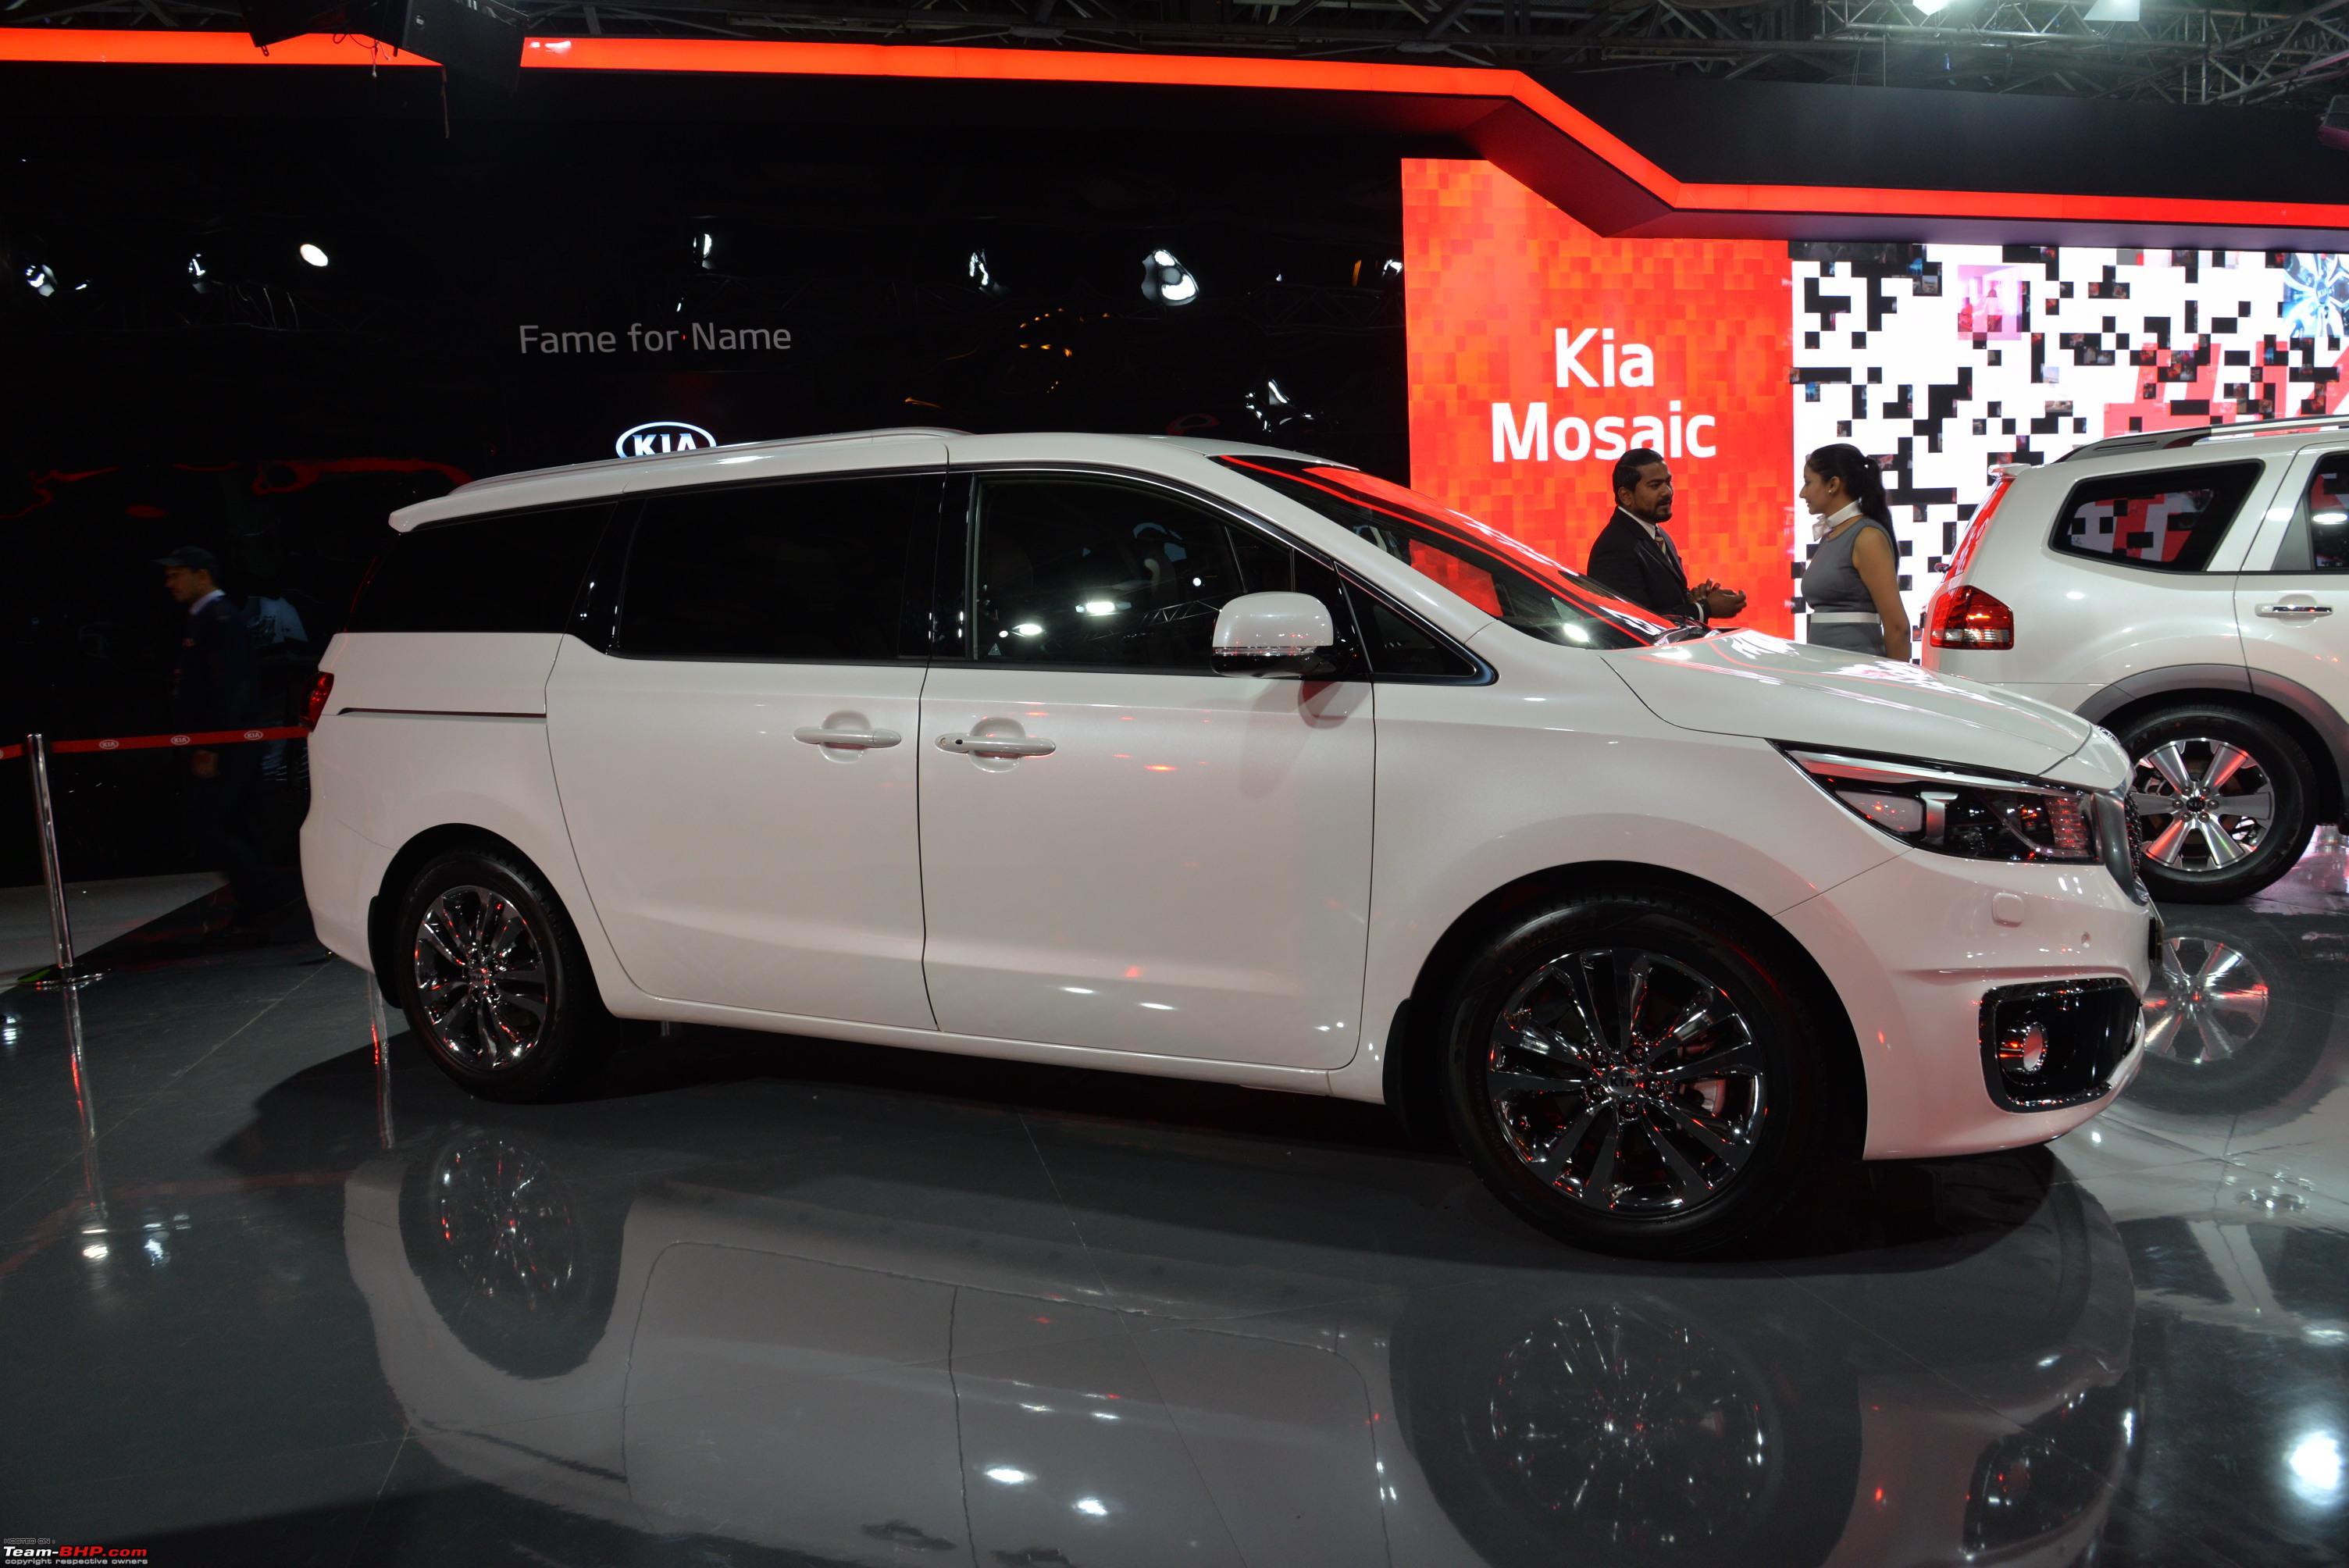 Kia Grand Carnival Mpv Coming In 2020 Edit Launched 24 95 Lakhs Team Bhp